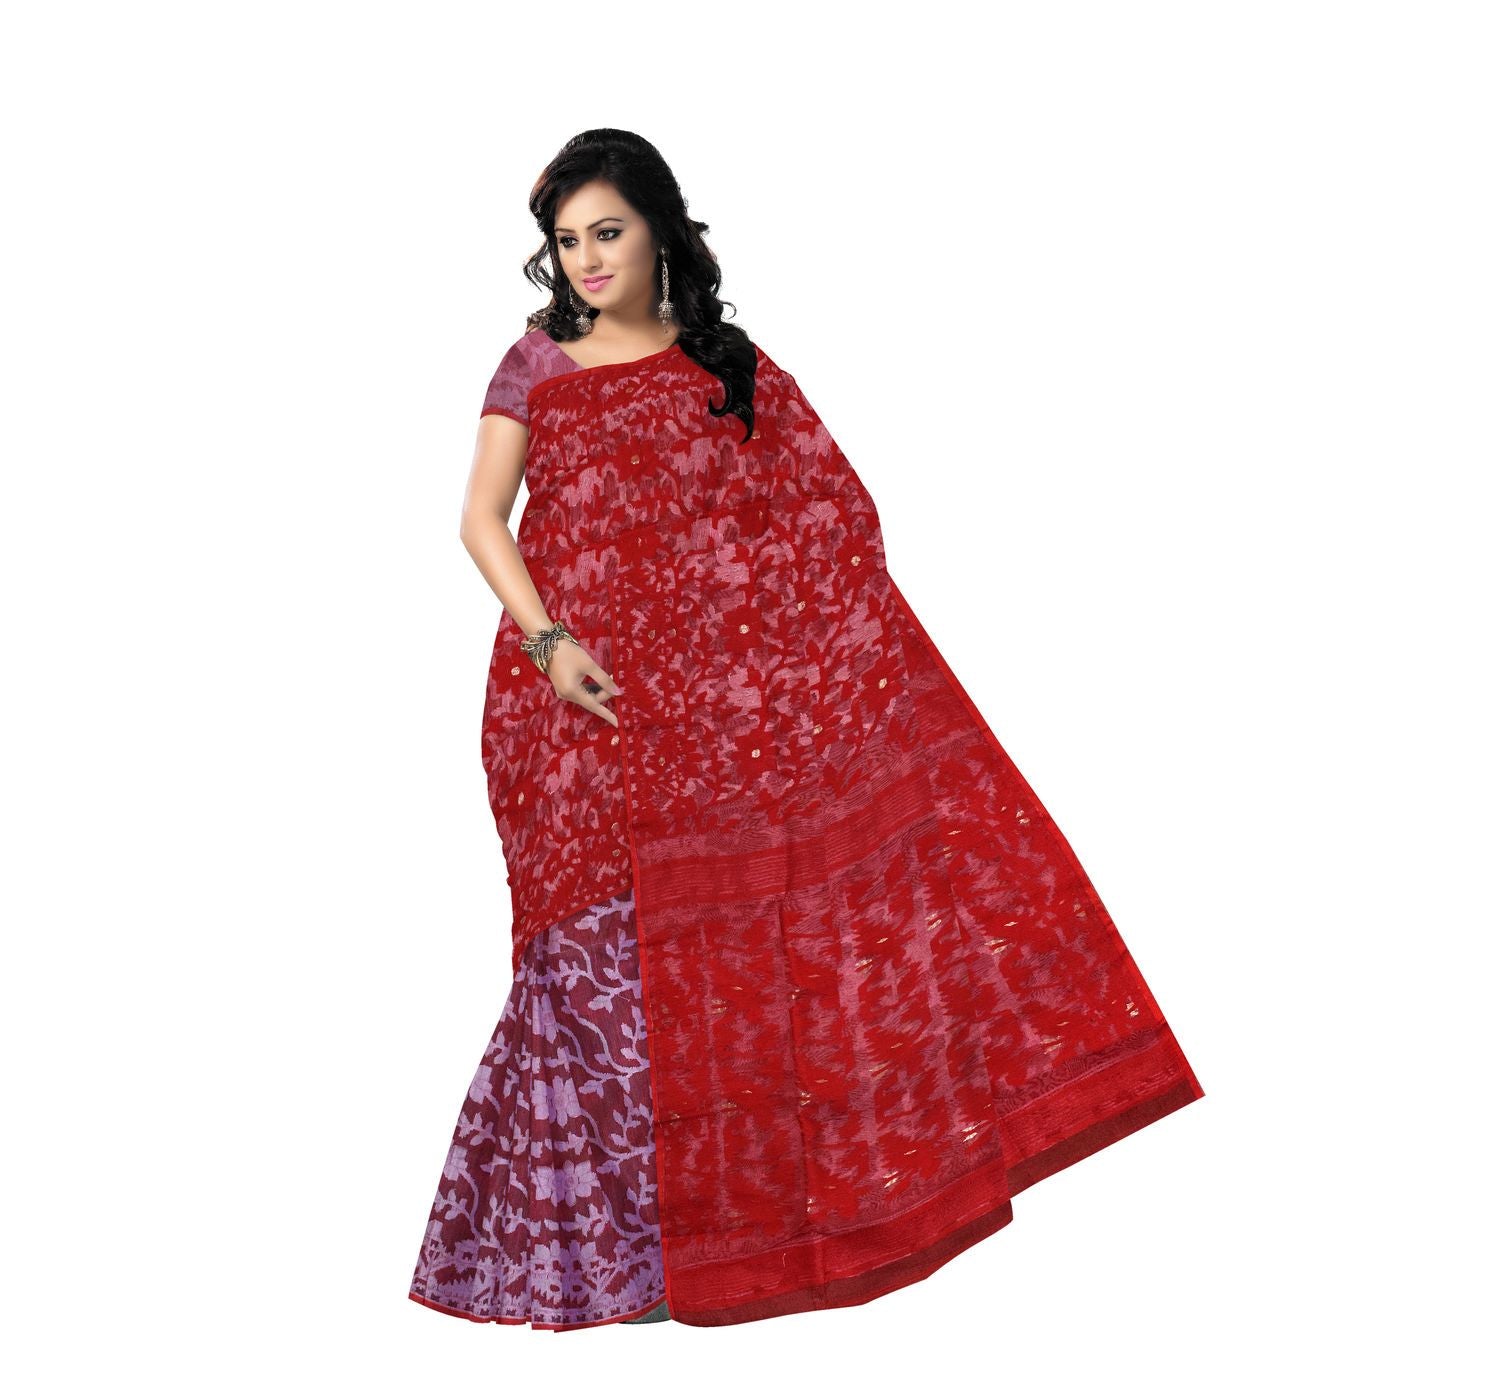 Red and White Floral Handloom Cotton Saree-OSSWB9053